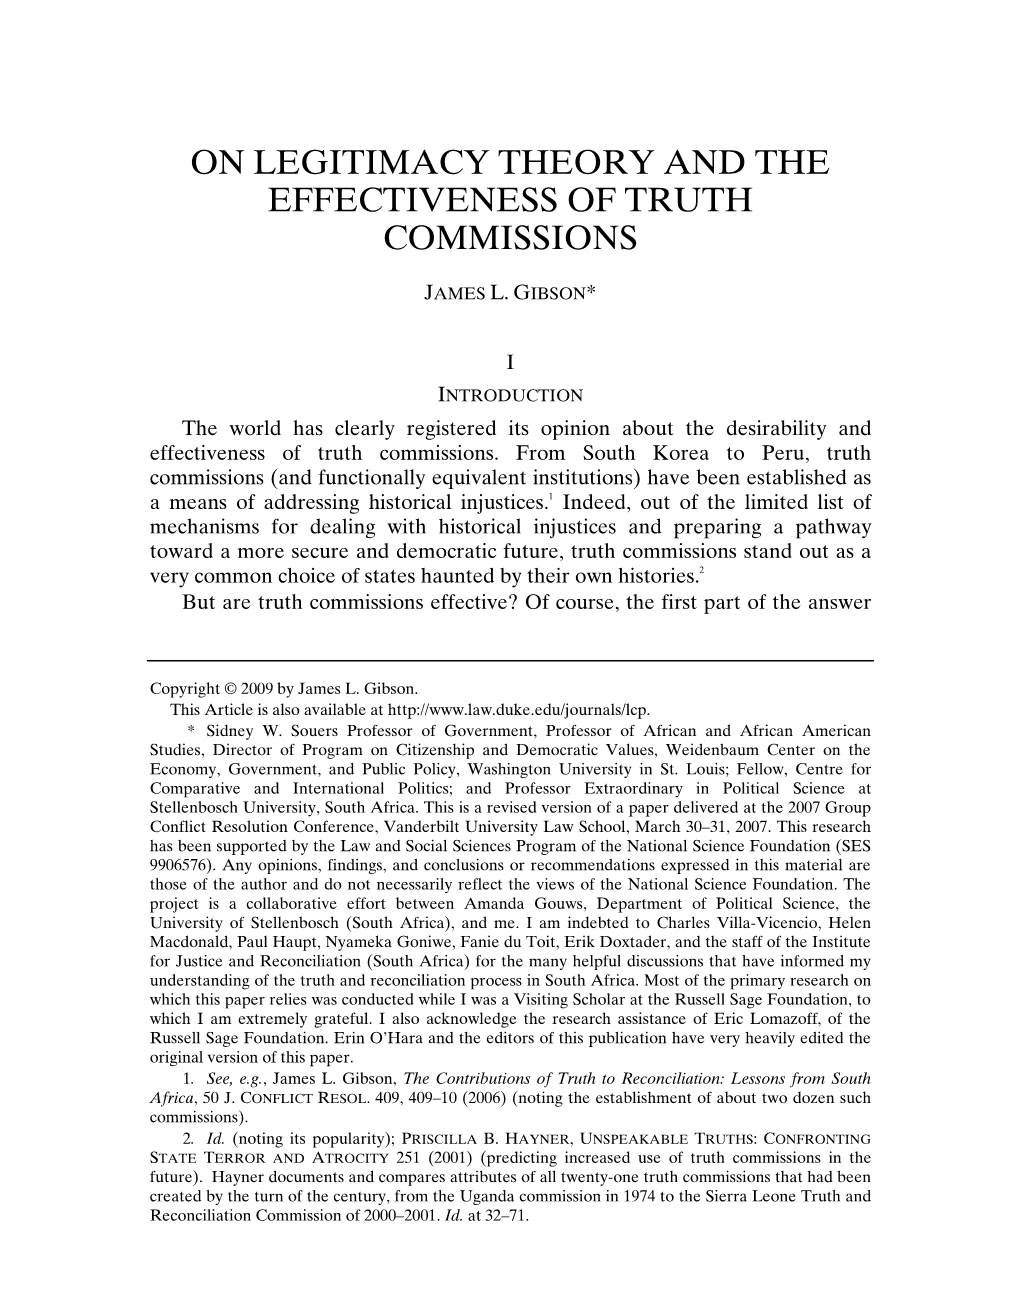 On Legitimacy Theory and the Effectiveness of Truth Commissions